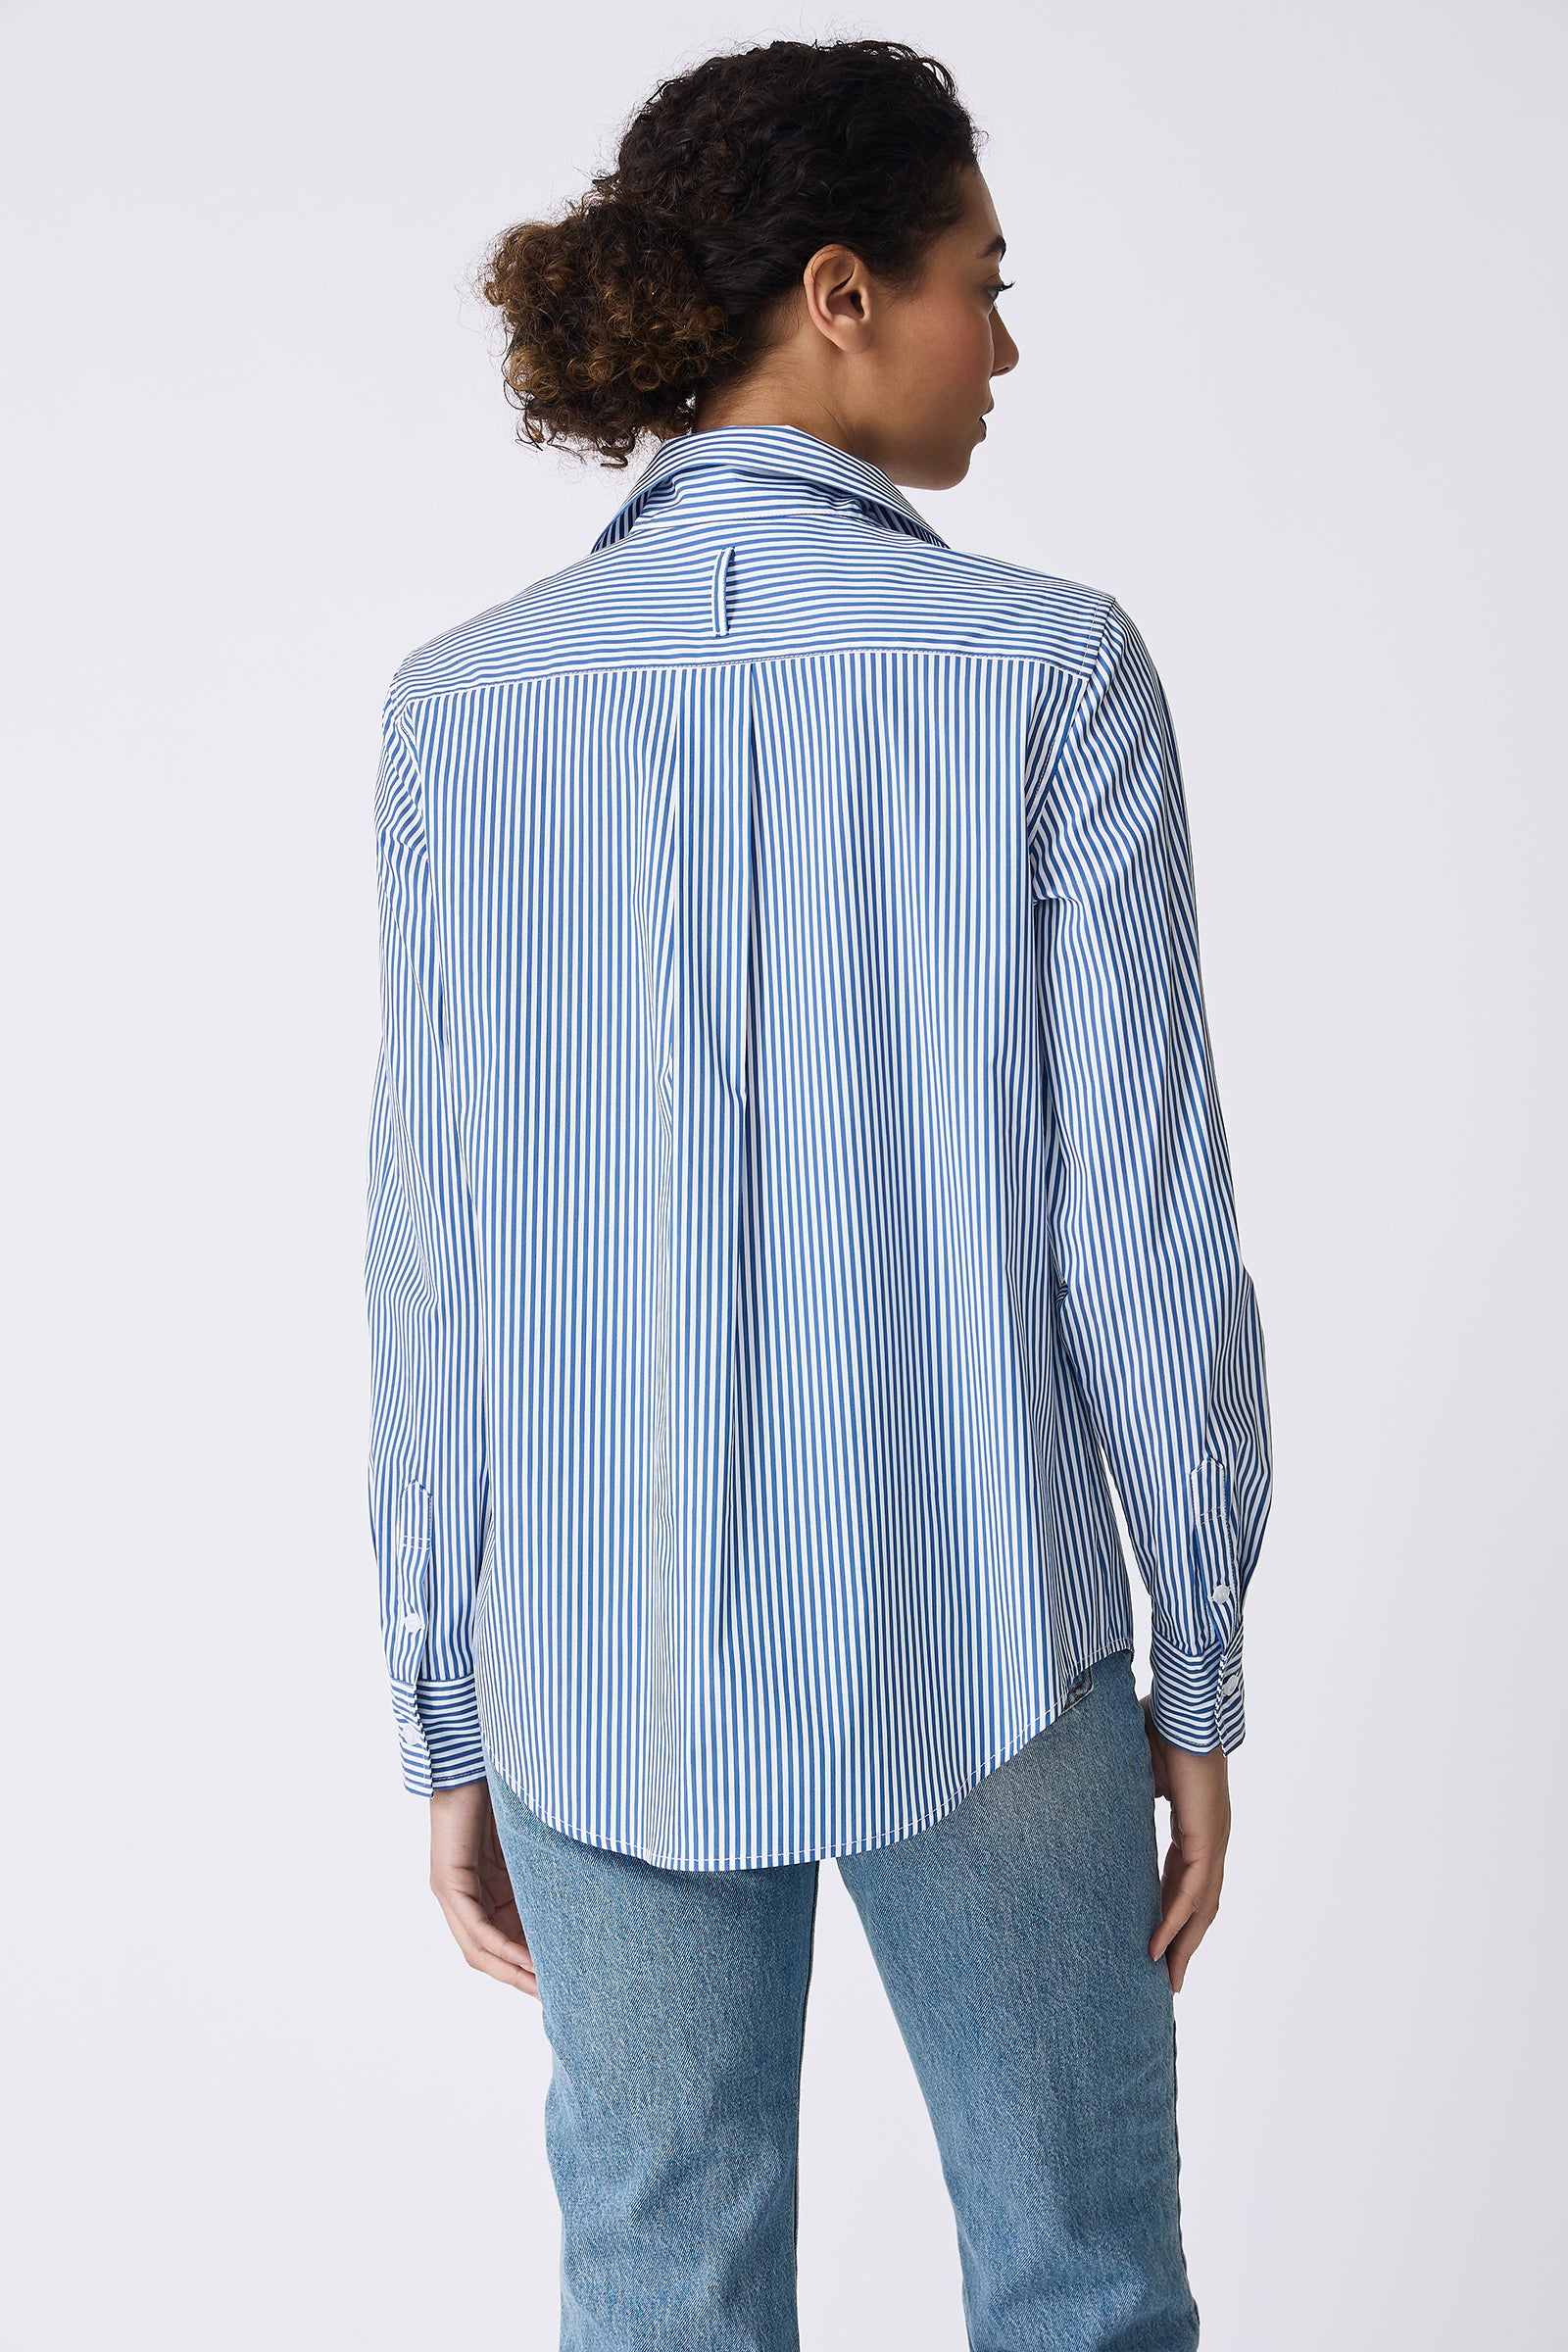 Kal Rieman image of the Ginna Box Pleat Shirt in Miami Stripe Blue on model looking right full front view